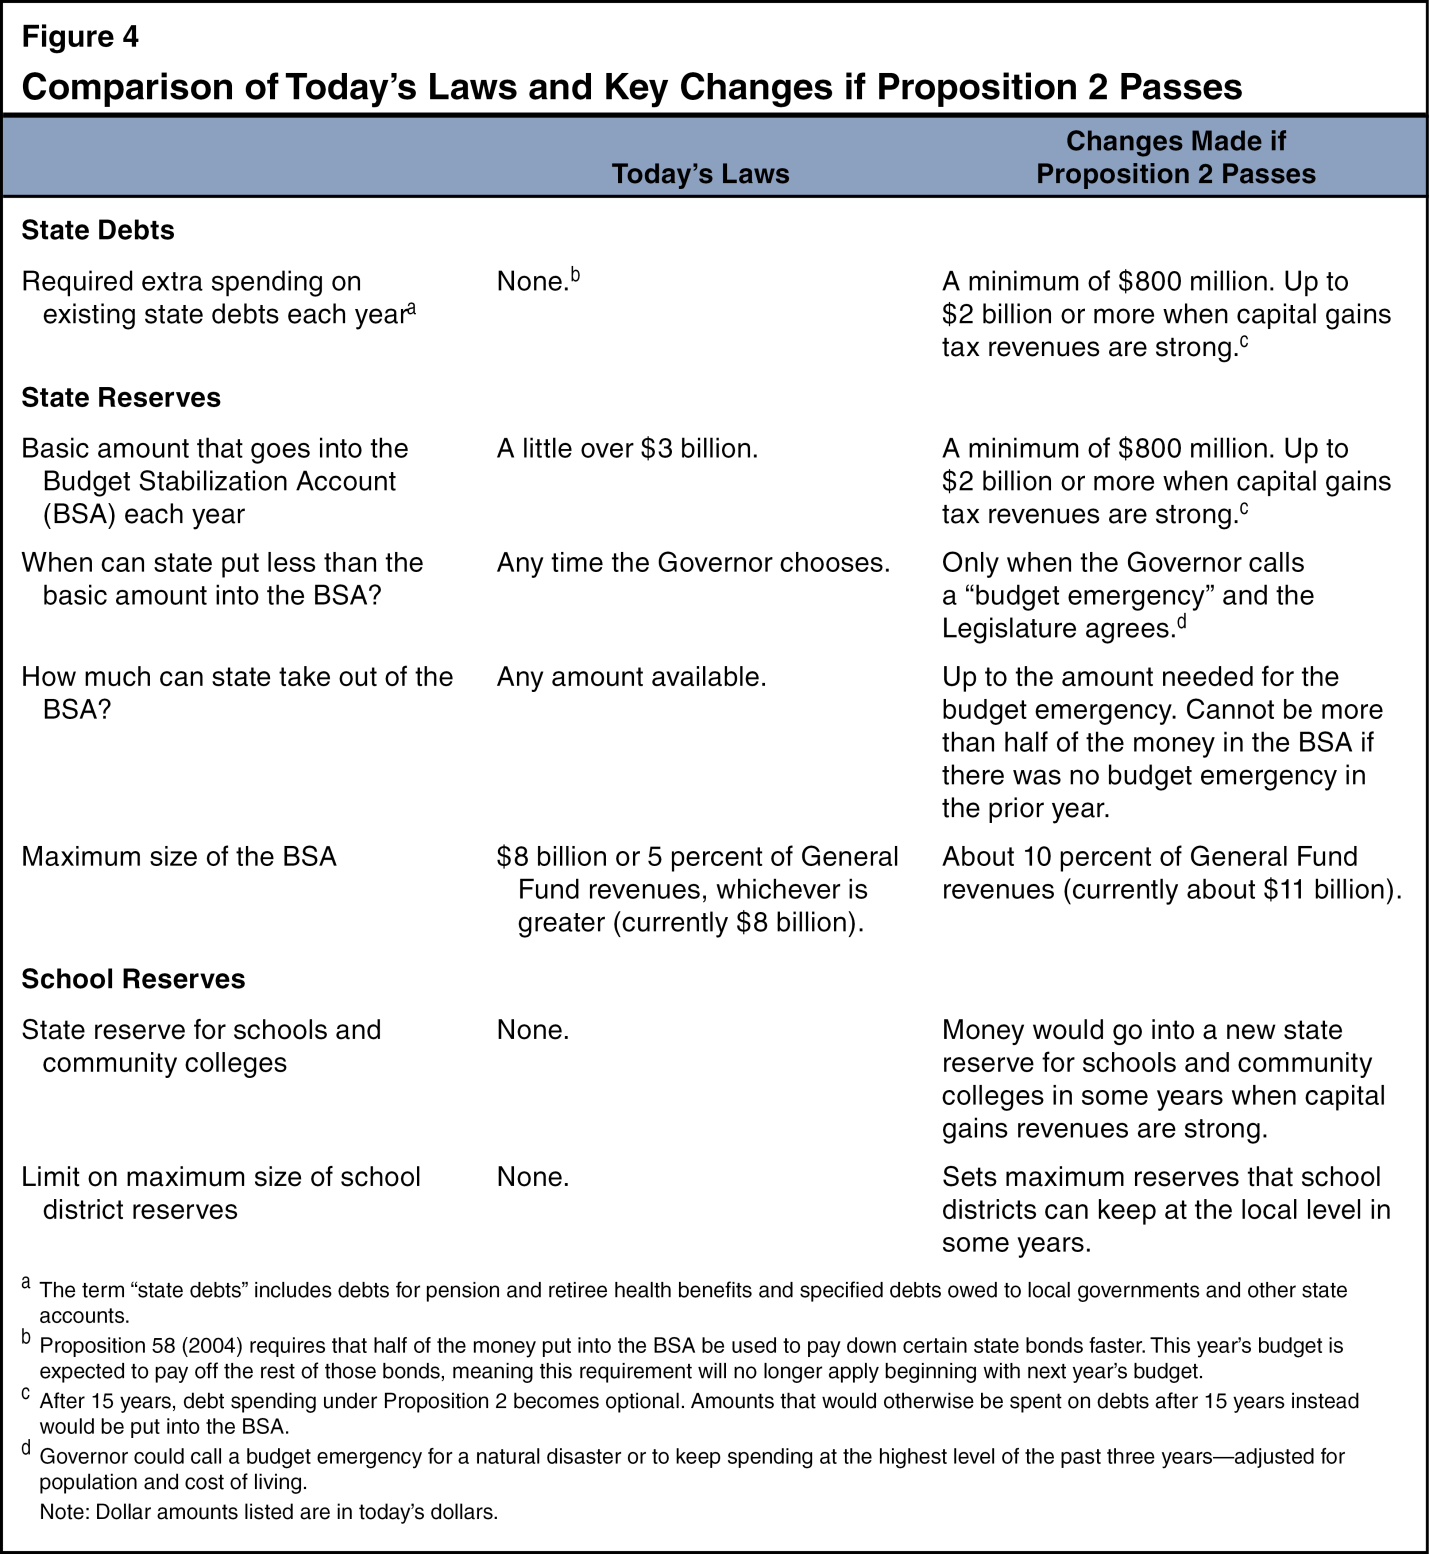 Fig 4 - Comparison of Today's Laws and Key Changes If Proposition 2 Passes